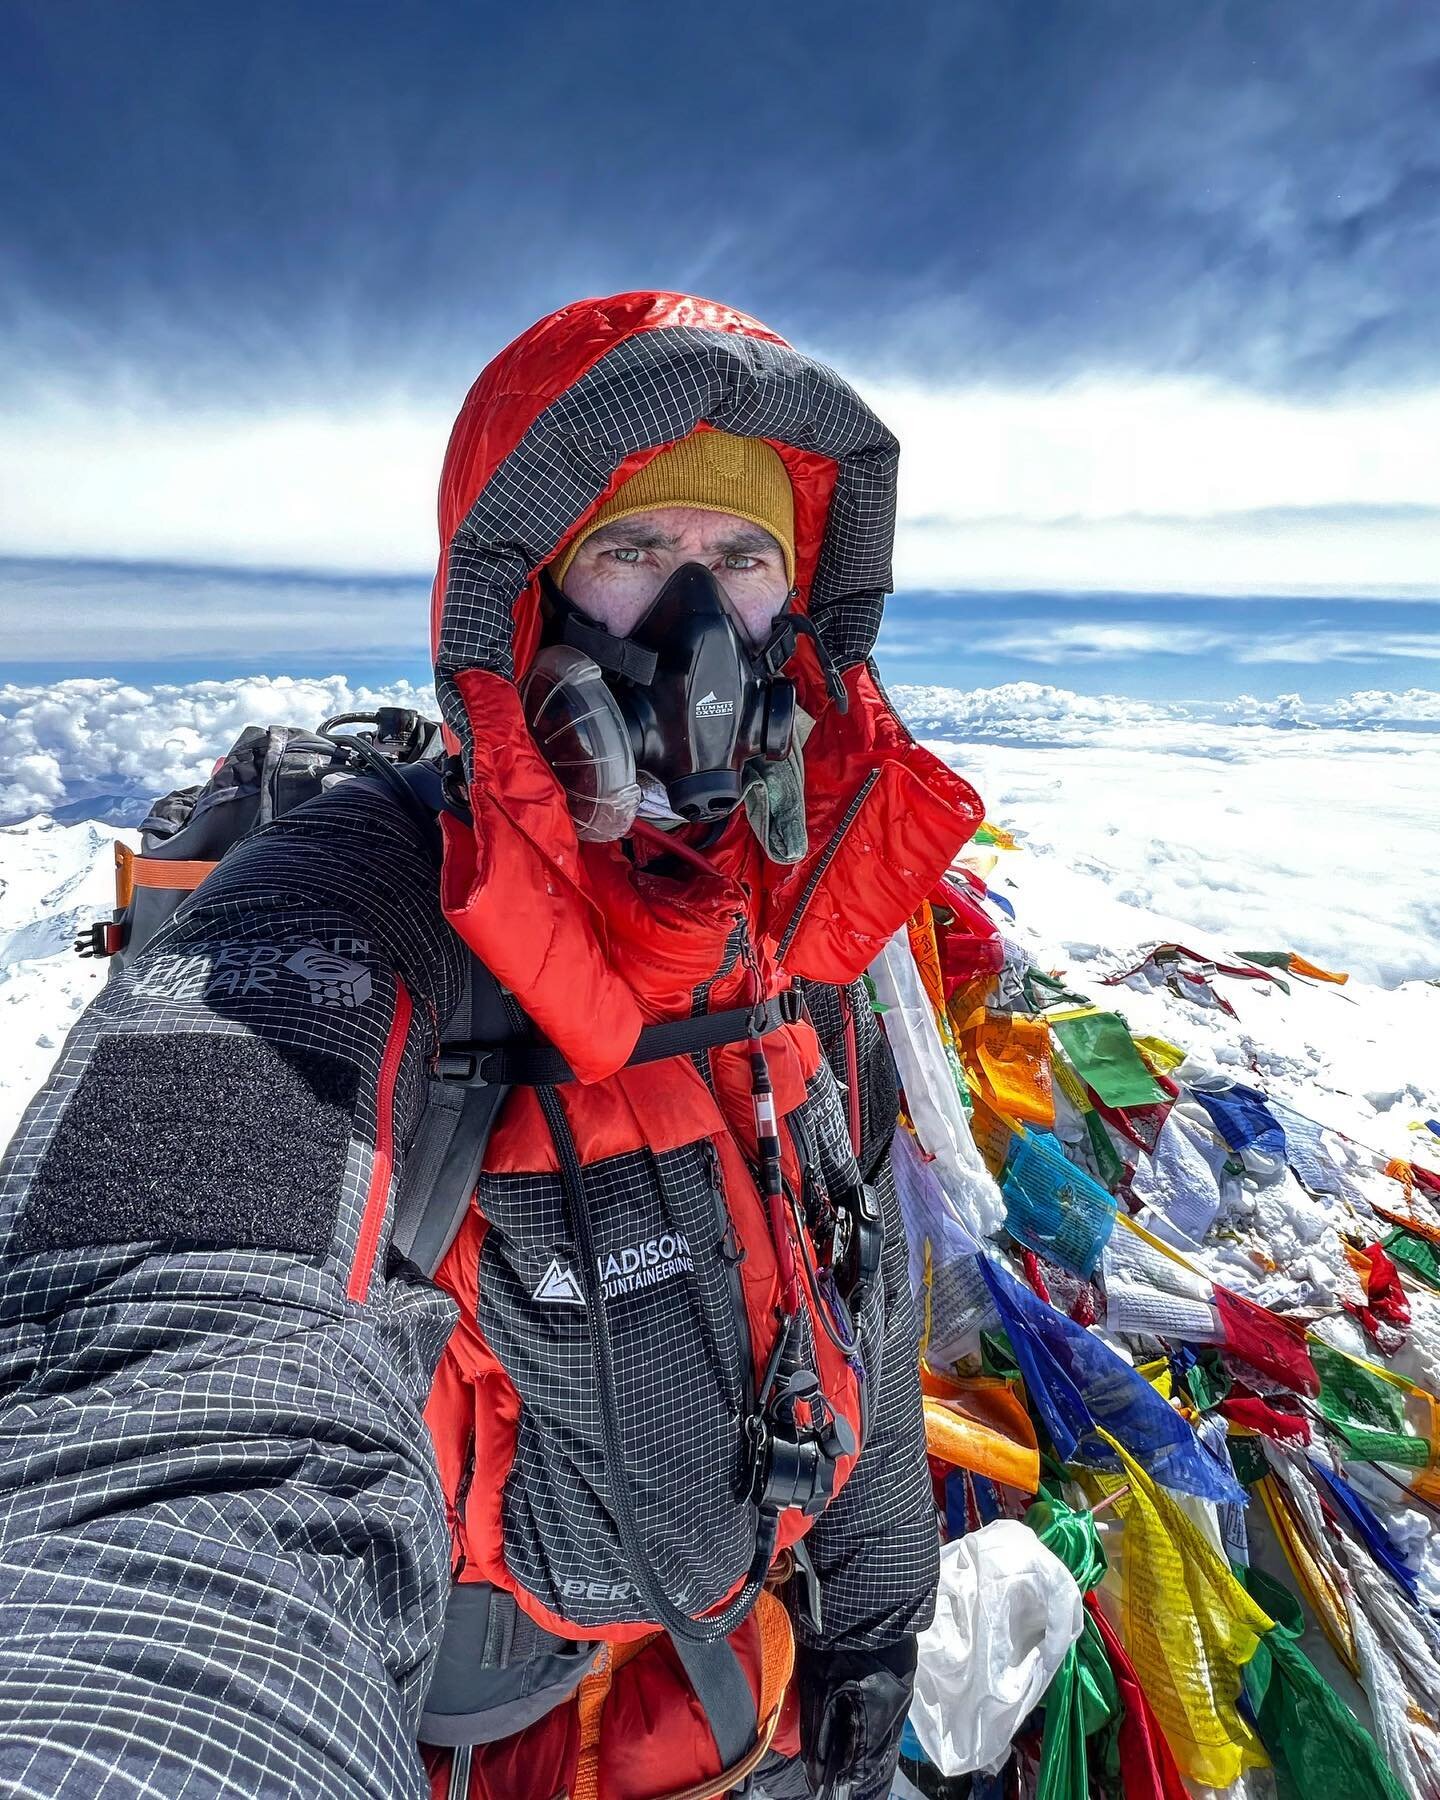 &ldquo;Head in the clouds&rdquo; - summit of Mount Everest on the 24th of May 2023. 
.
I&rsquo;ve always been quite sceptical of the commercial nature of this mountain, the huge queues, stories of inexperienced climbers, the exploitation of the Sherp